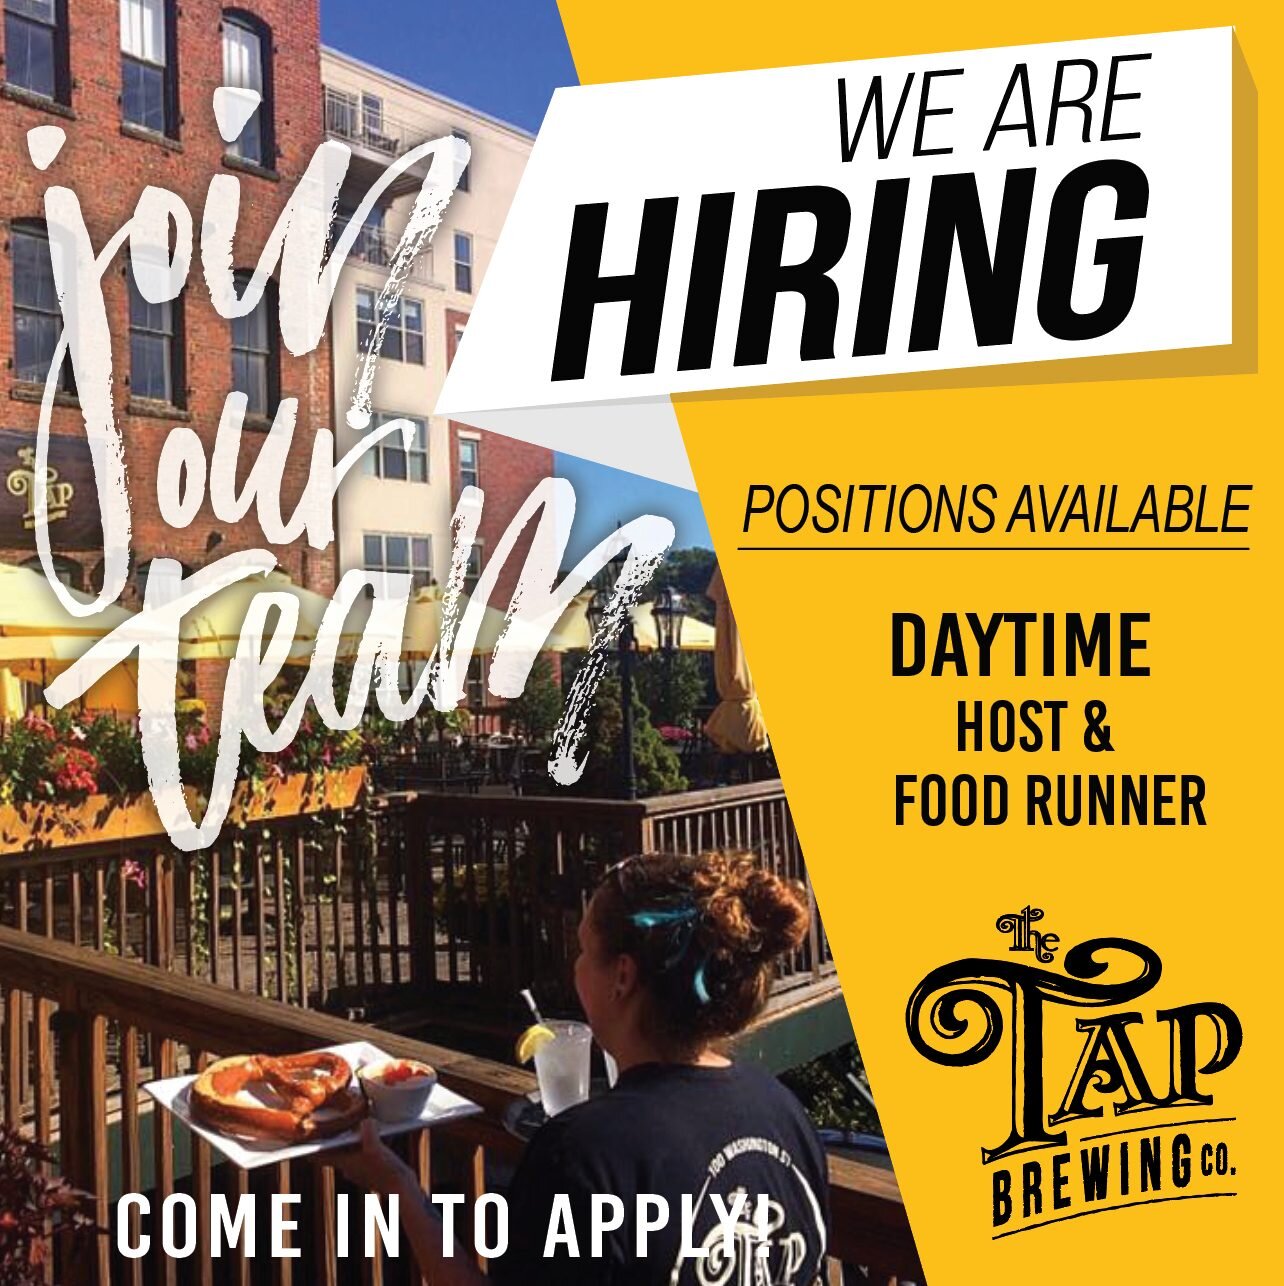 The Tap is looking for daytime food-runner &amp; host! Come into apply!
#nowhiring #daytime  #comeintoapply #host  #foodrunner #summerhelp #tapbrewingcompany